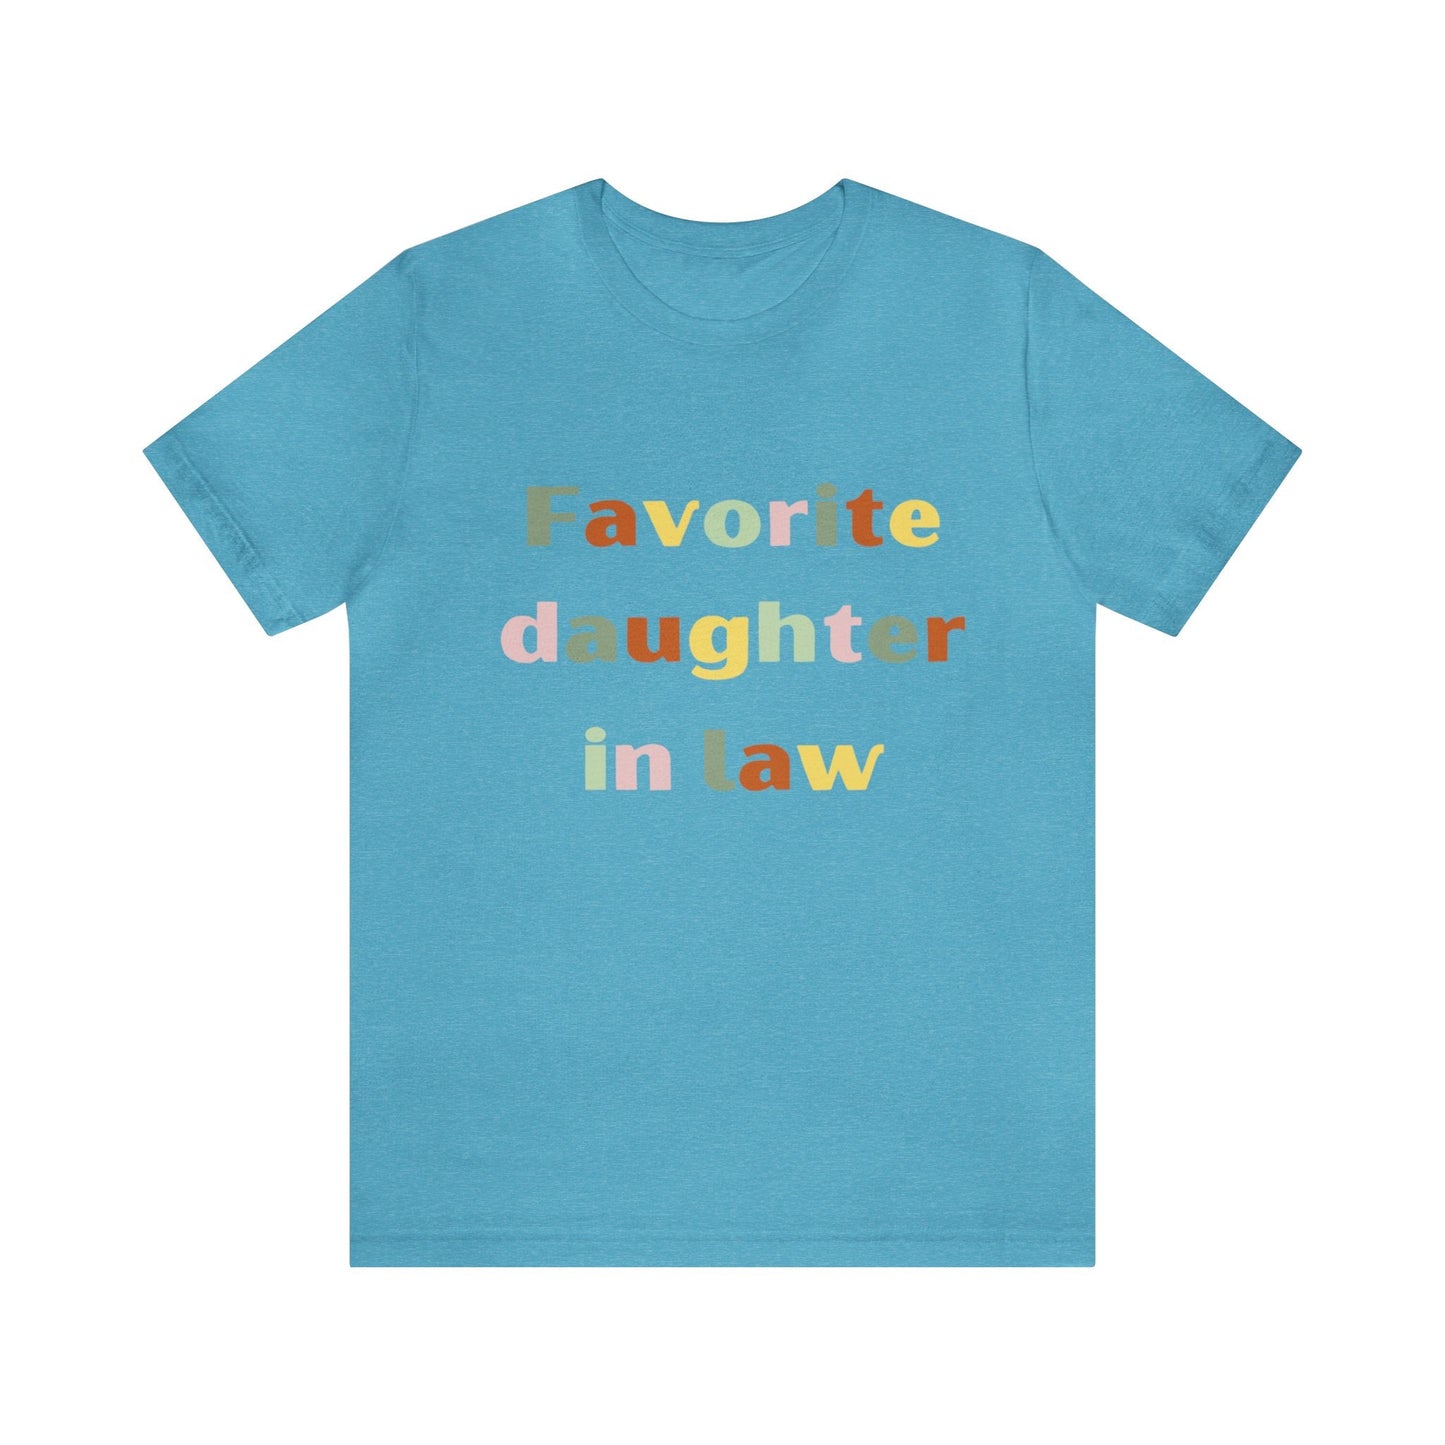 Get trendy with Favorite daughter-in -law tee shirt - T-Shirt available at Good Gift Company. Grab yours for $18 today!